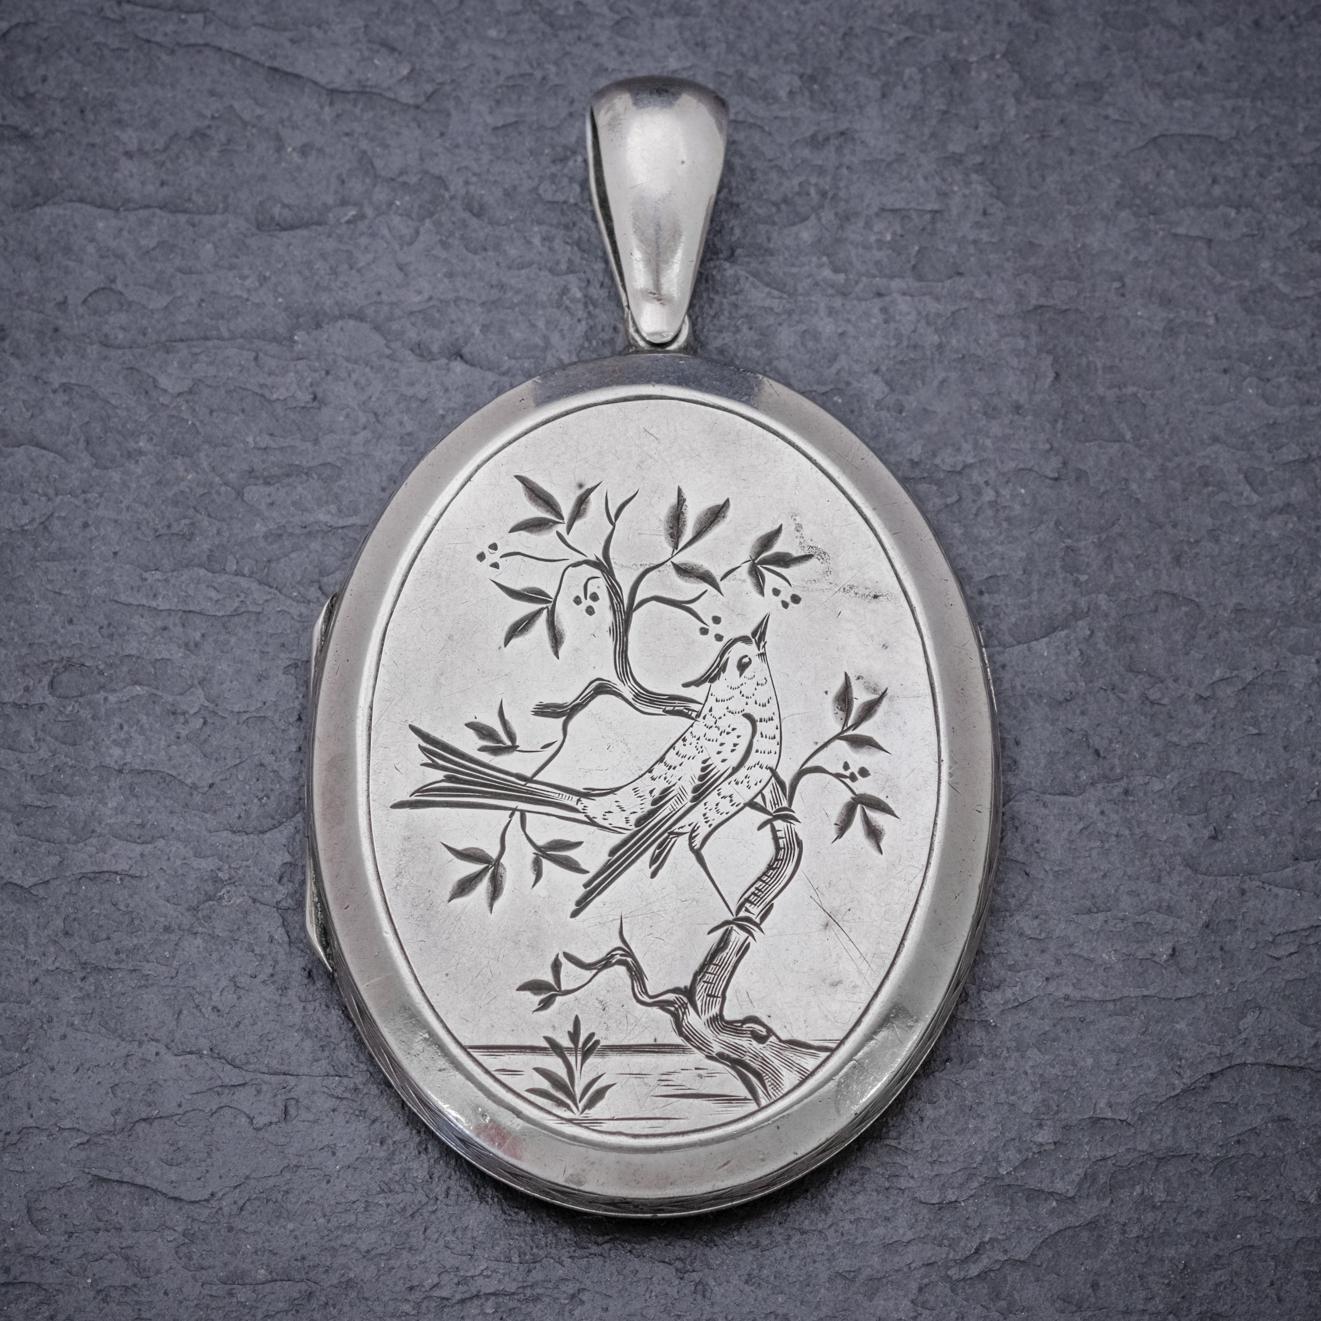 An exquisite Antique mid-Victorian locket displaying a beautiful engraved image of a swallow perched on a tree branch on the front and fabulous foliate patterning and Forget me nots on the reverse.  

Swallows were a popular image in Victorian